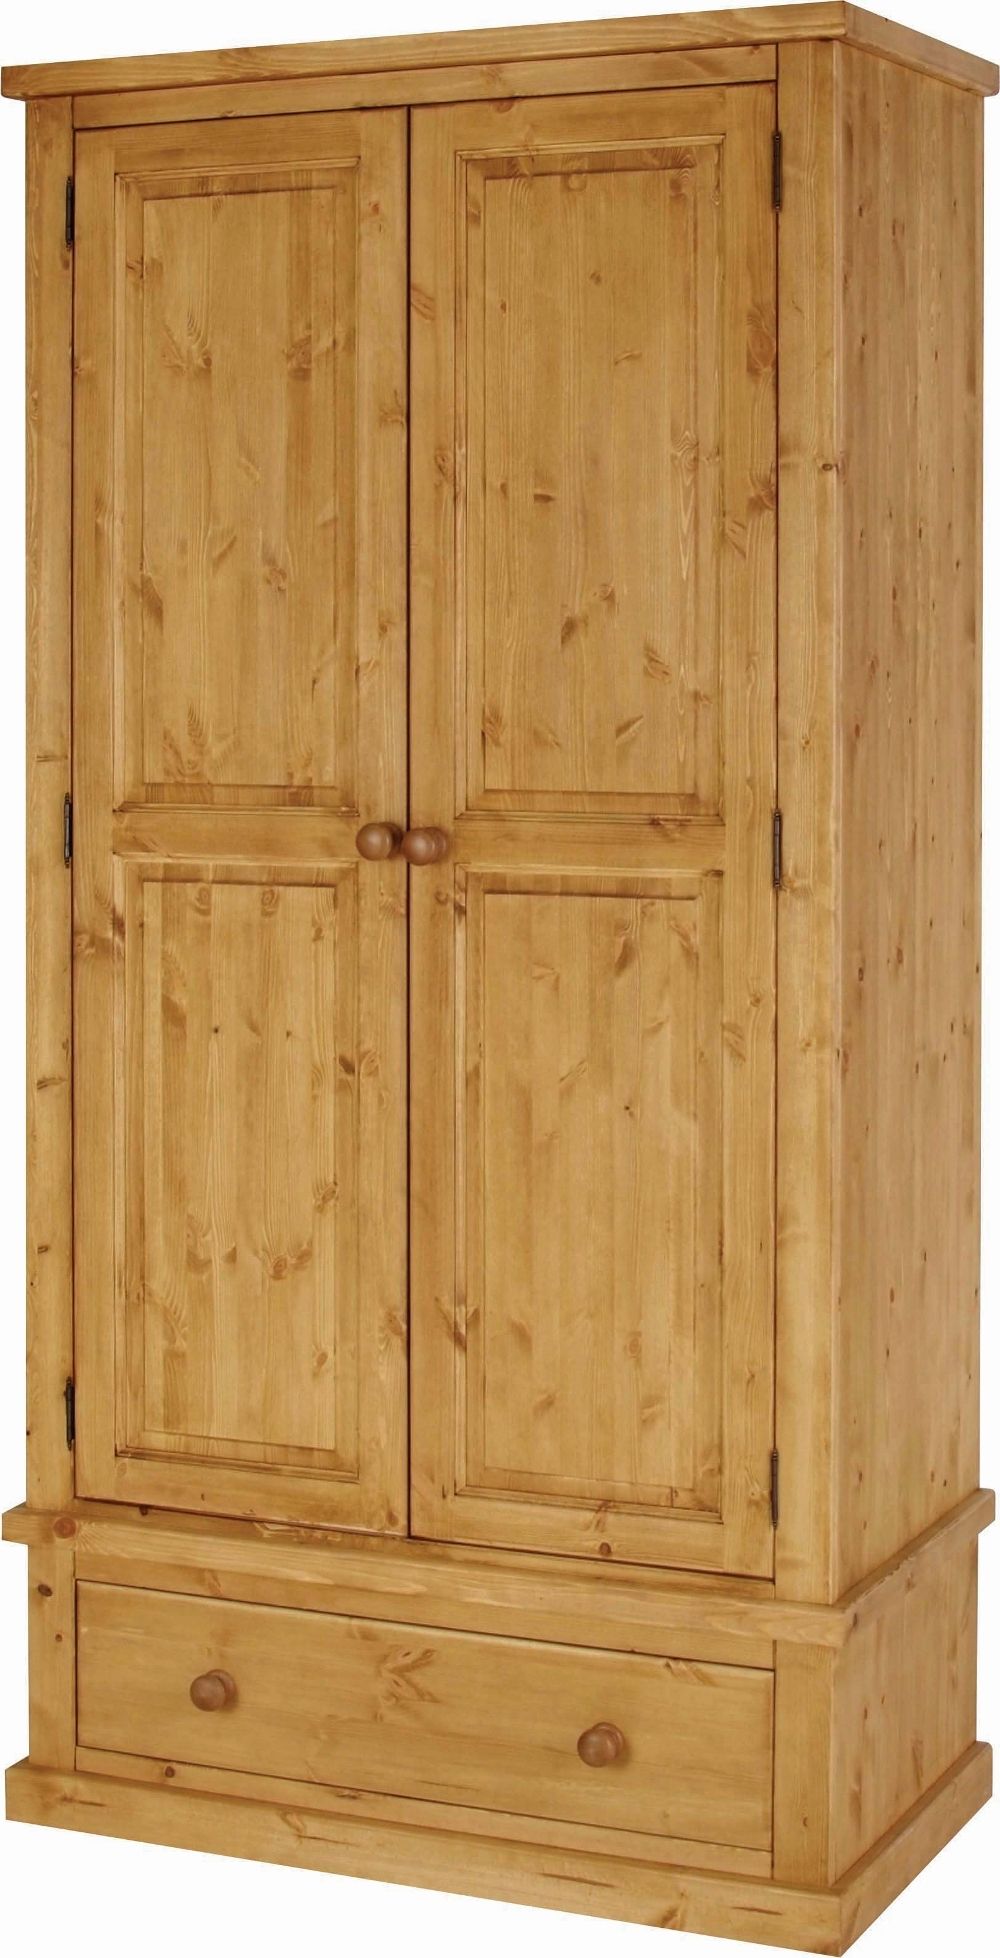 Fashionable Pine Wardrobes With Drawers With Large Pine Wardrobe With Drawers • Drawer Furniture (View 1 of 15)